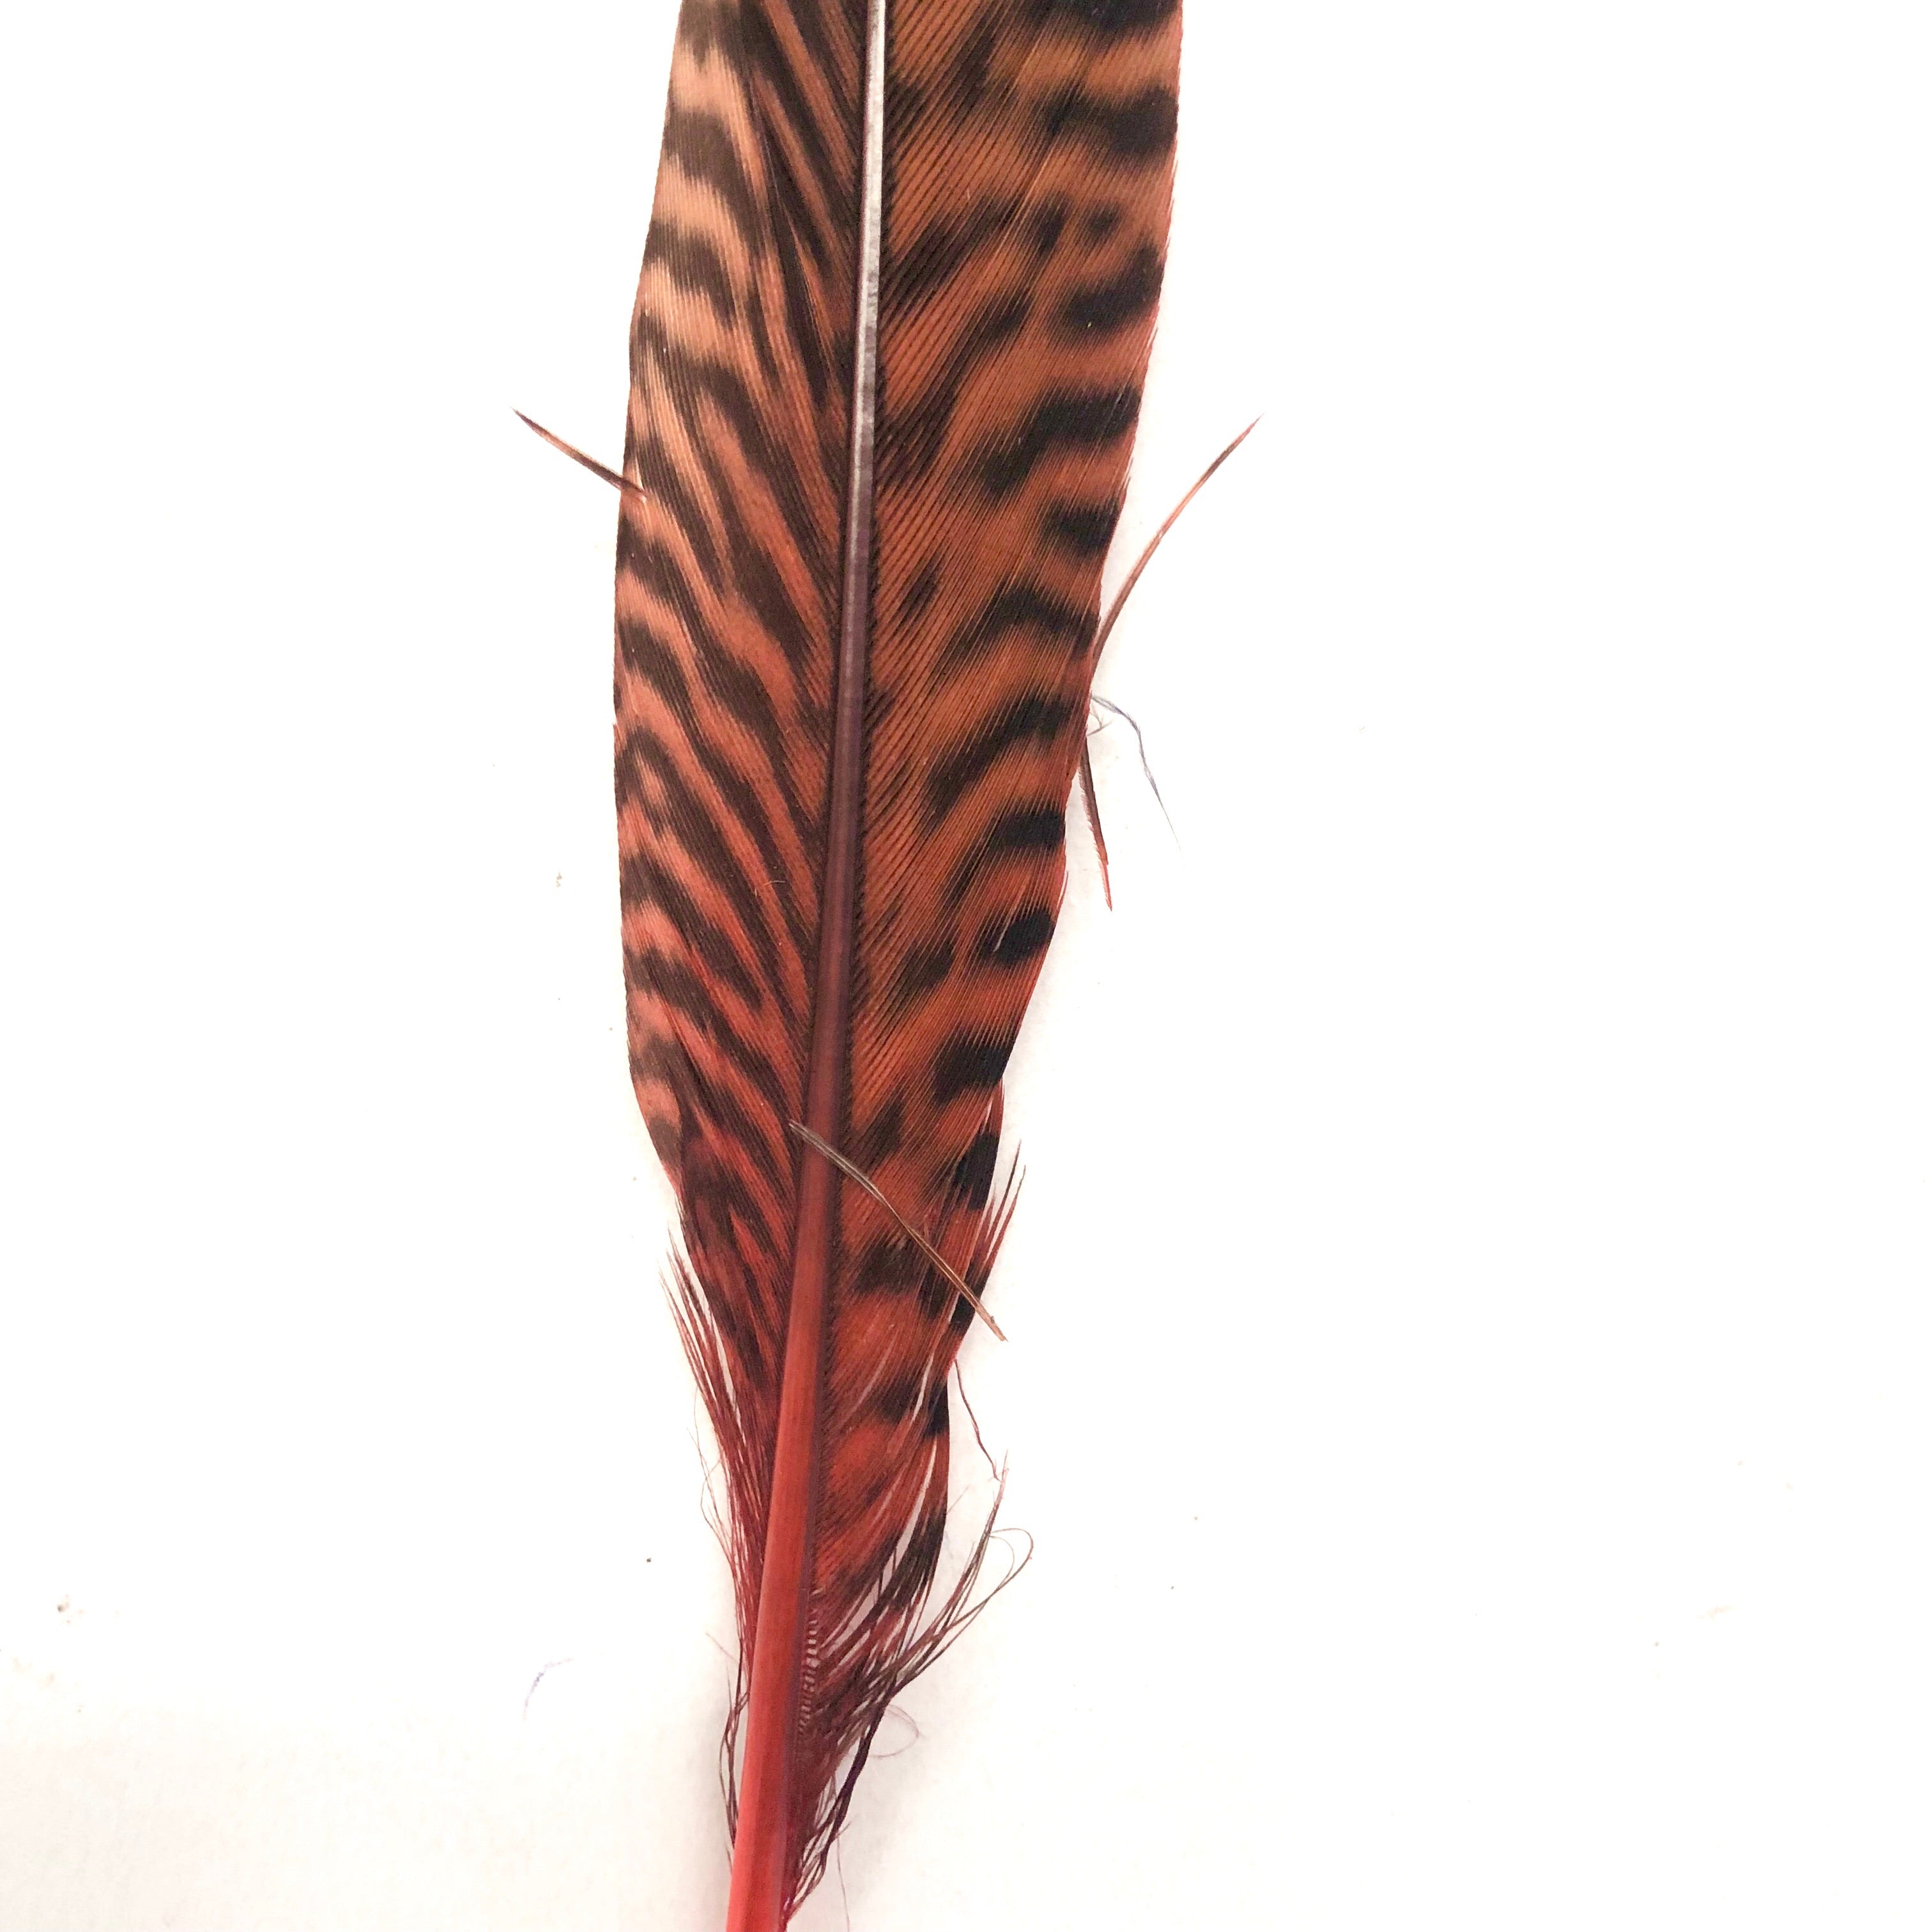 6" to 10" Golden Pheasant Side Tail Feather x 10 pcs - Dusty Pink